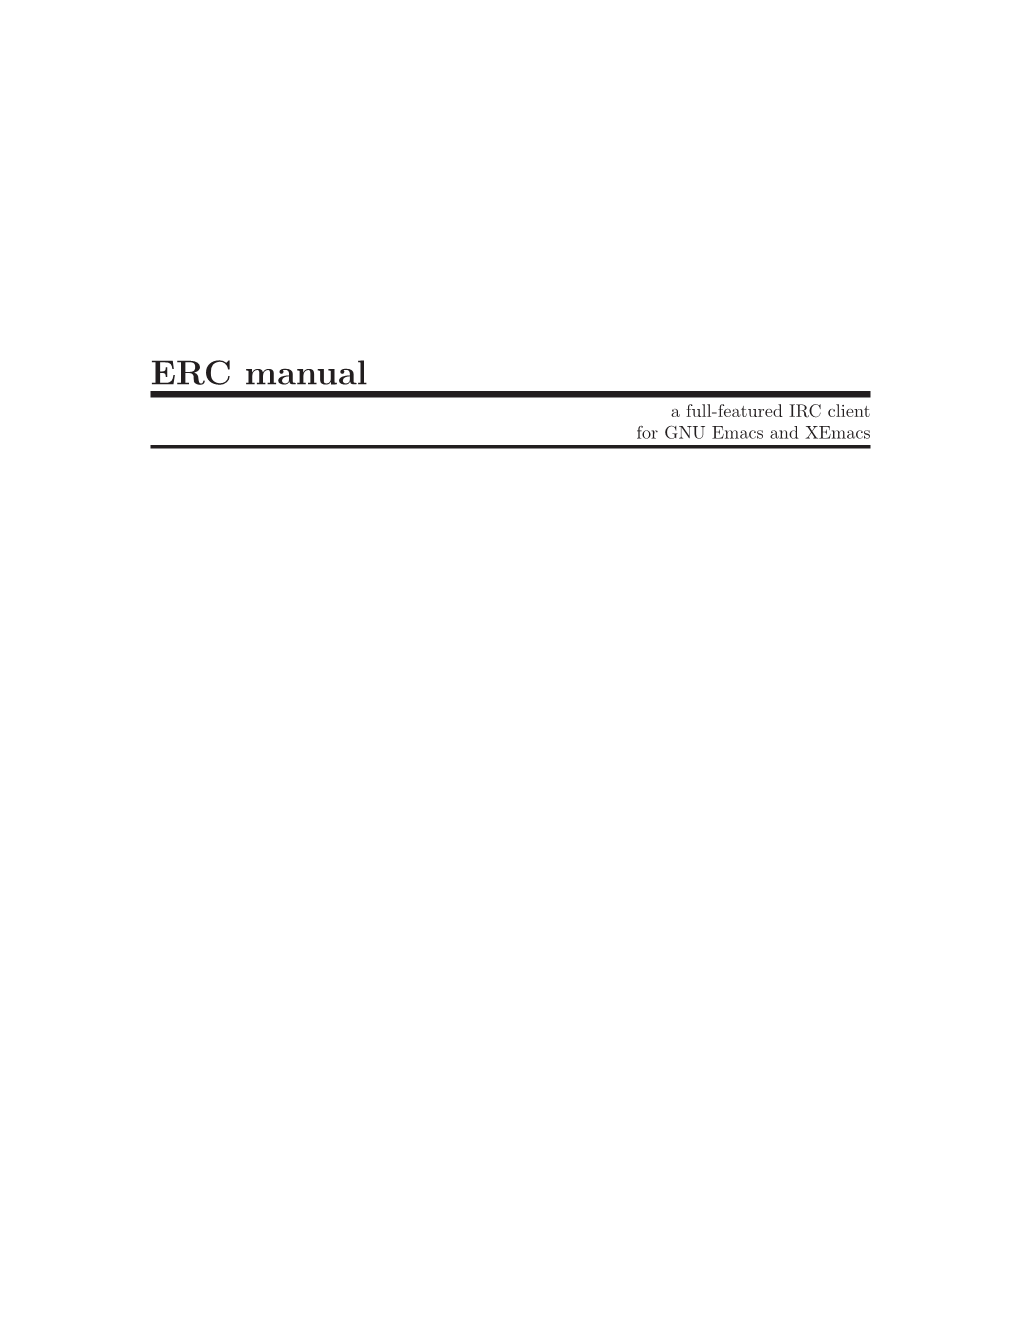 ERC Manual a Full-Featured IRC Client for GNU Emacs and Xemacs This Manual Is for ERC Version 5.3